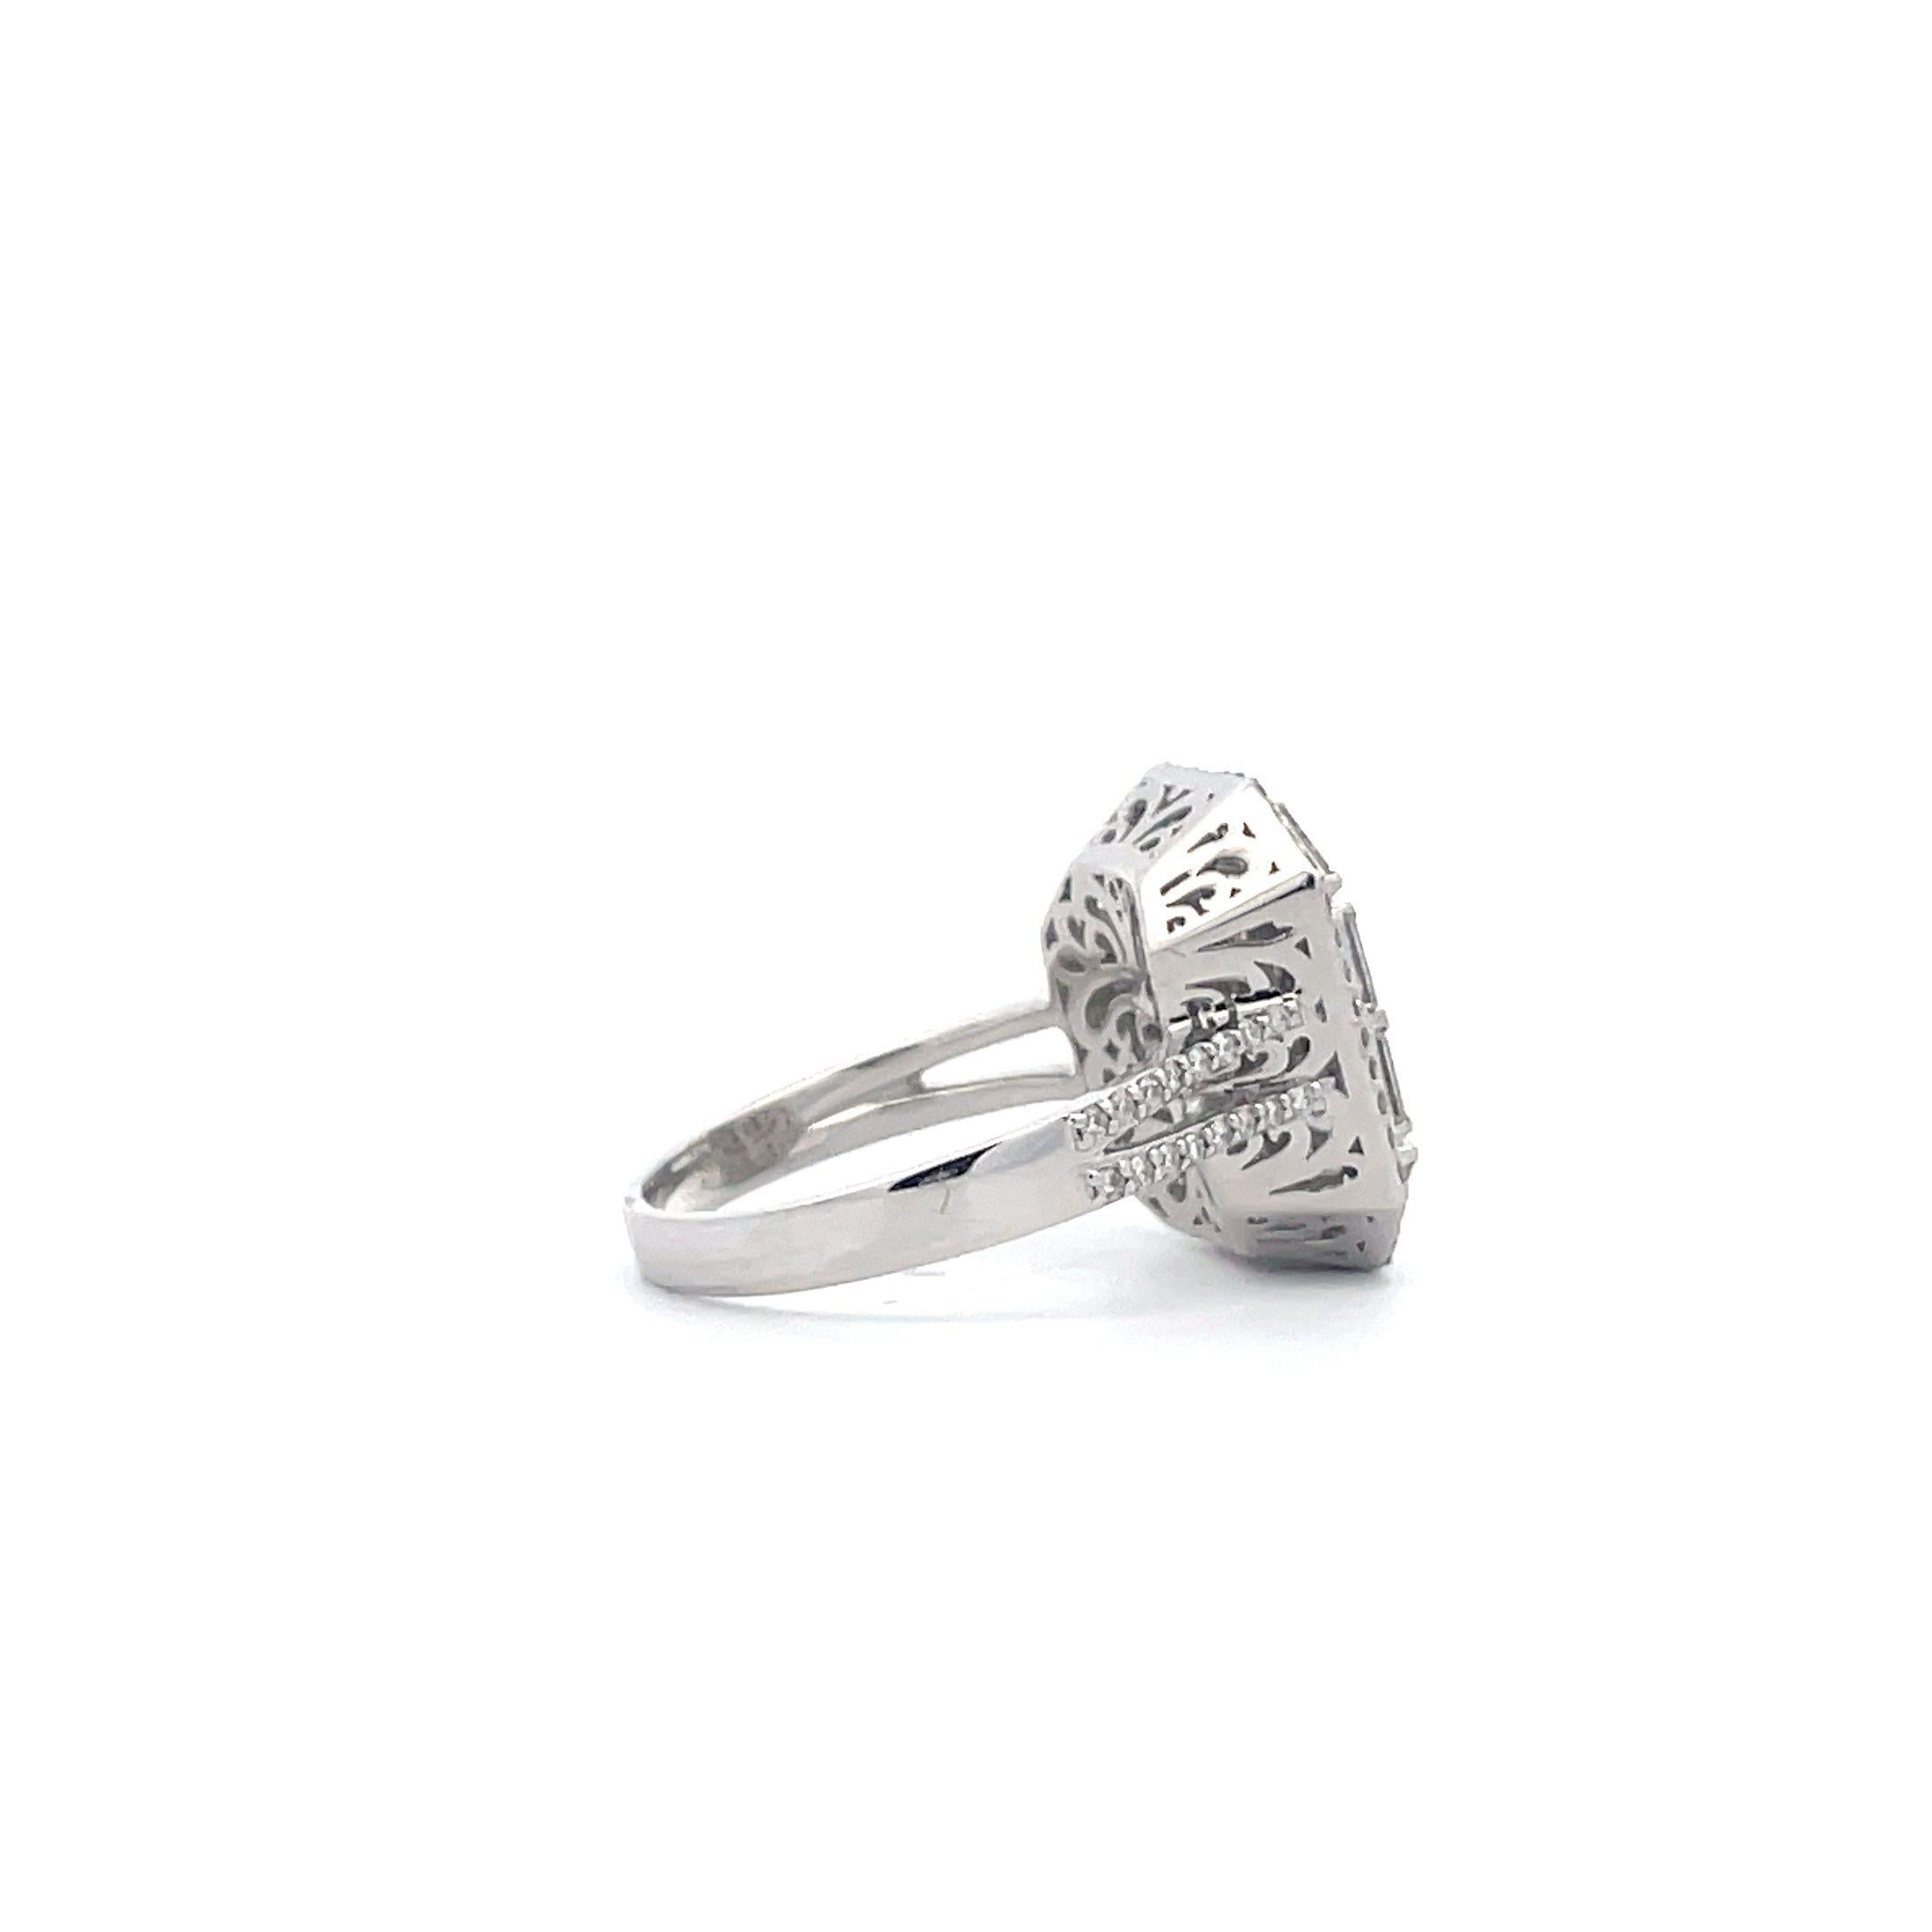 Baguette Cut 1.22 Ct. Baguette Diamond Shield Cocktail Ring in 14K White Gold